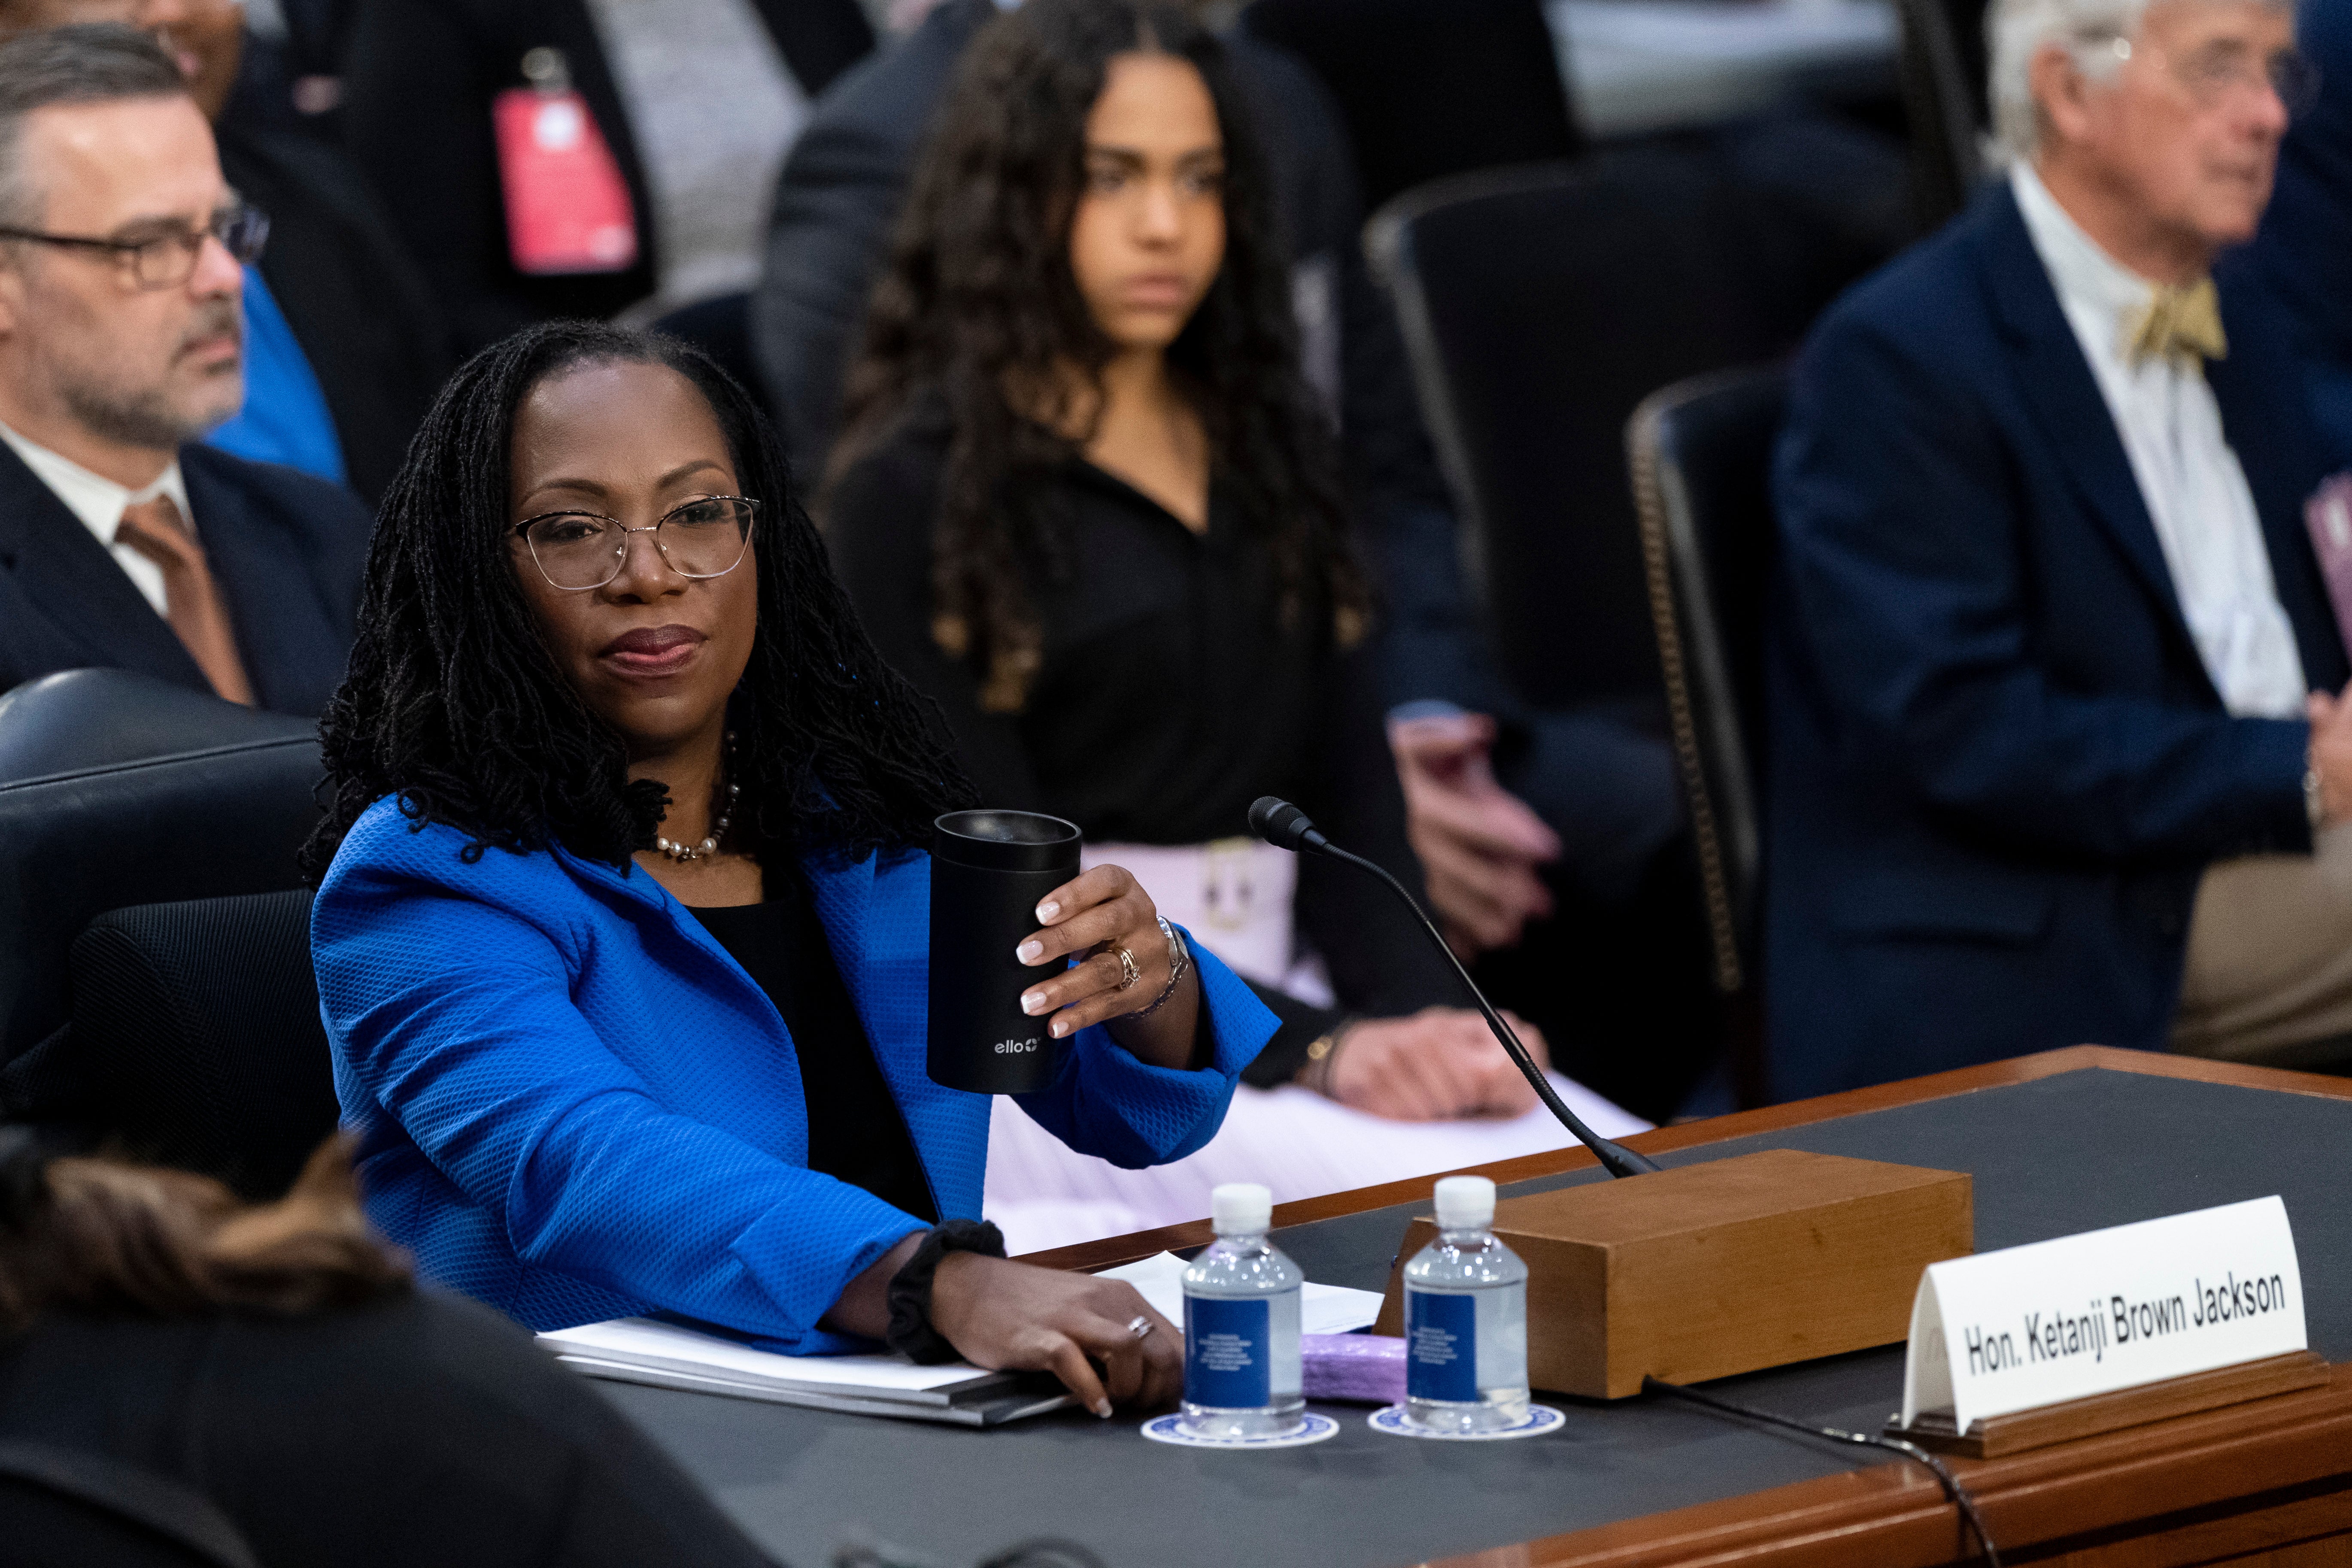 Supreme Court nominee Ketanji Brown Jackson arrives to testify during her Senate Judiciary Committee confirmation hearing on Capitol Hill in Washington, Wednesday, March 23, 2022